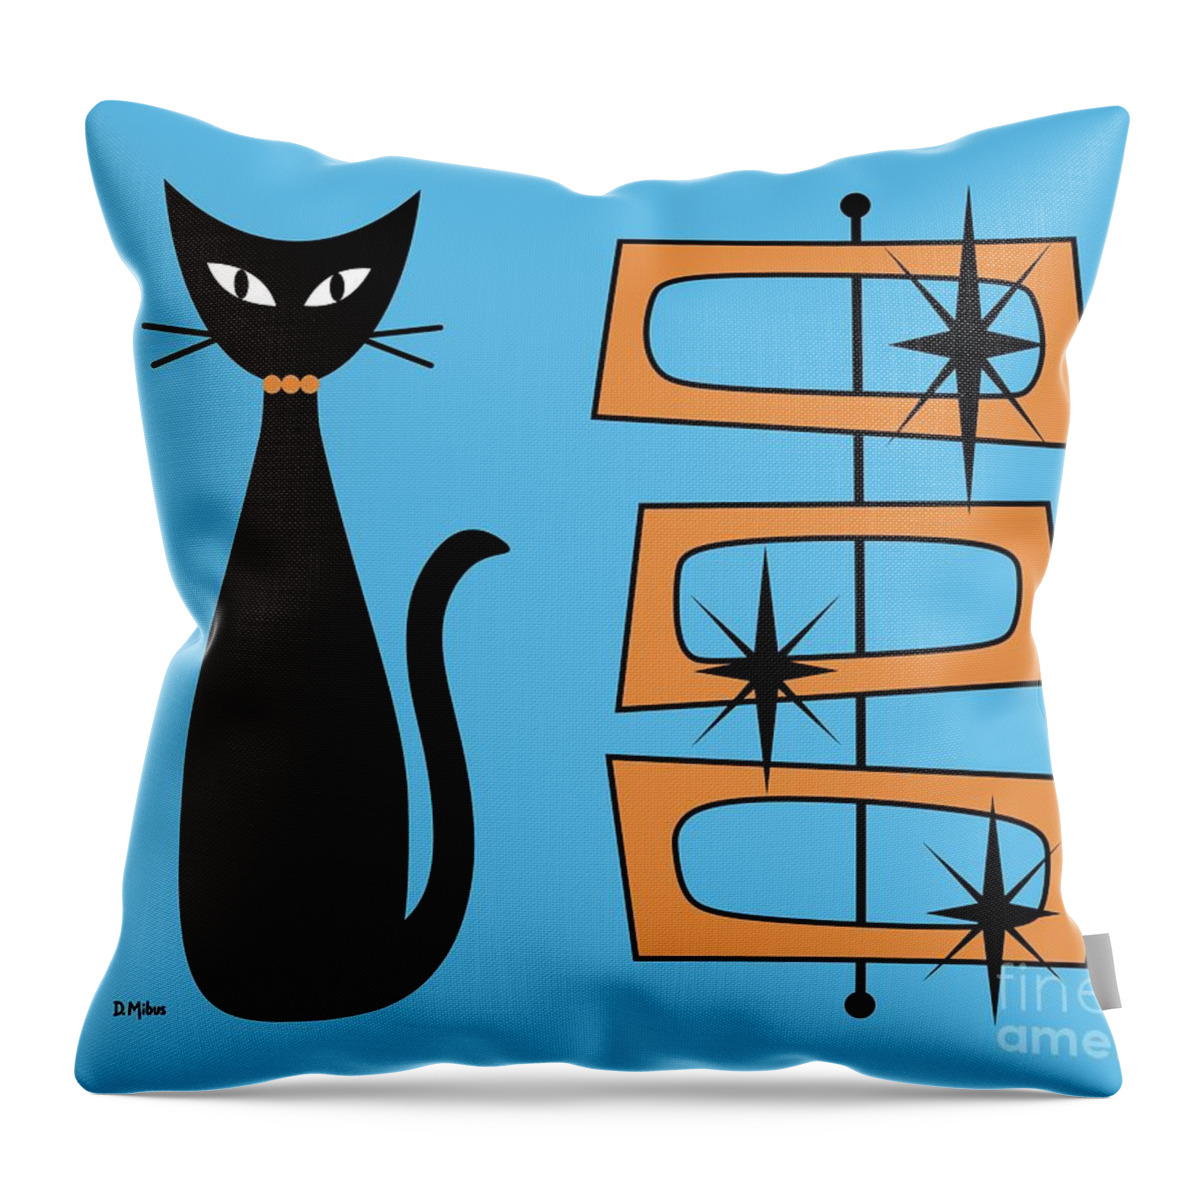 Mid Century Cat Throw Pillow featuring the digital art Black Cat with Mod Rectangles Blue by Donna Mibus